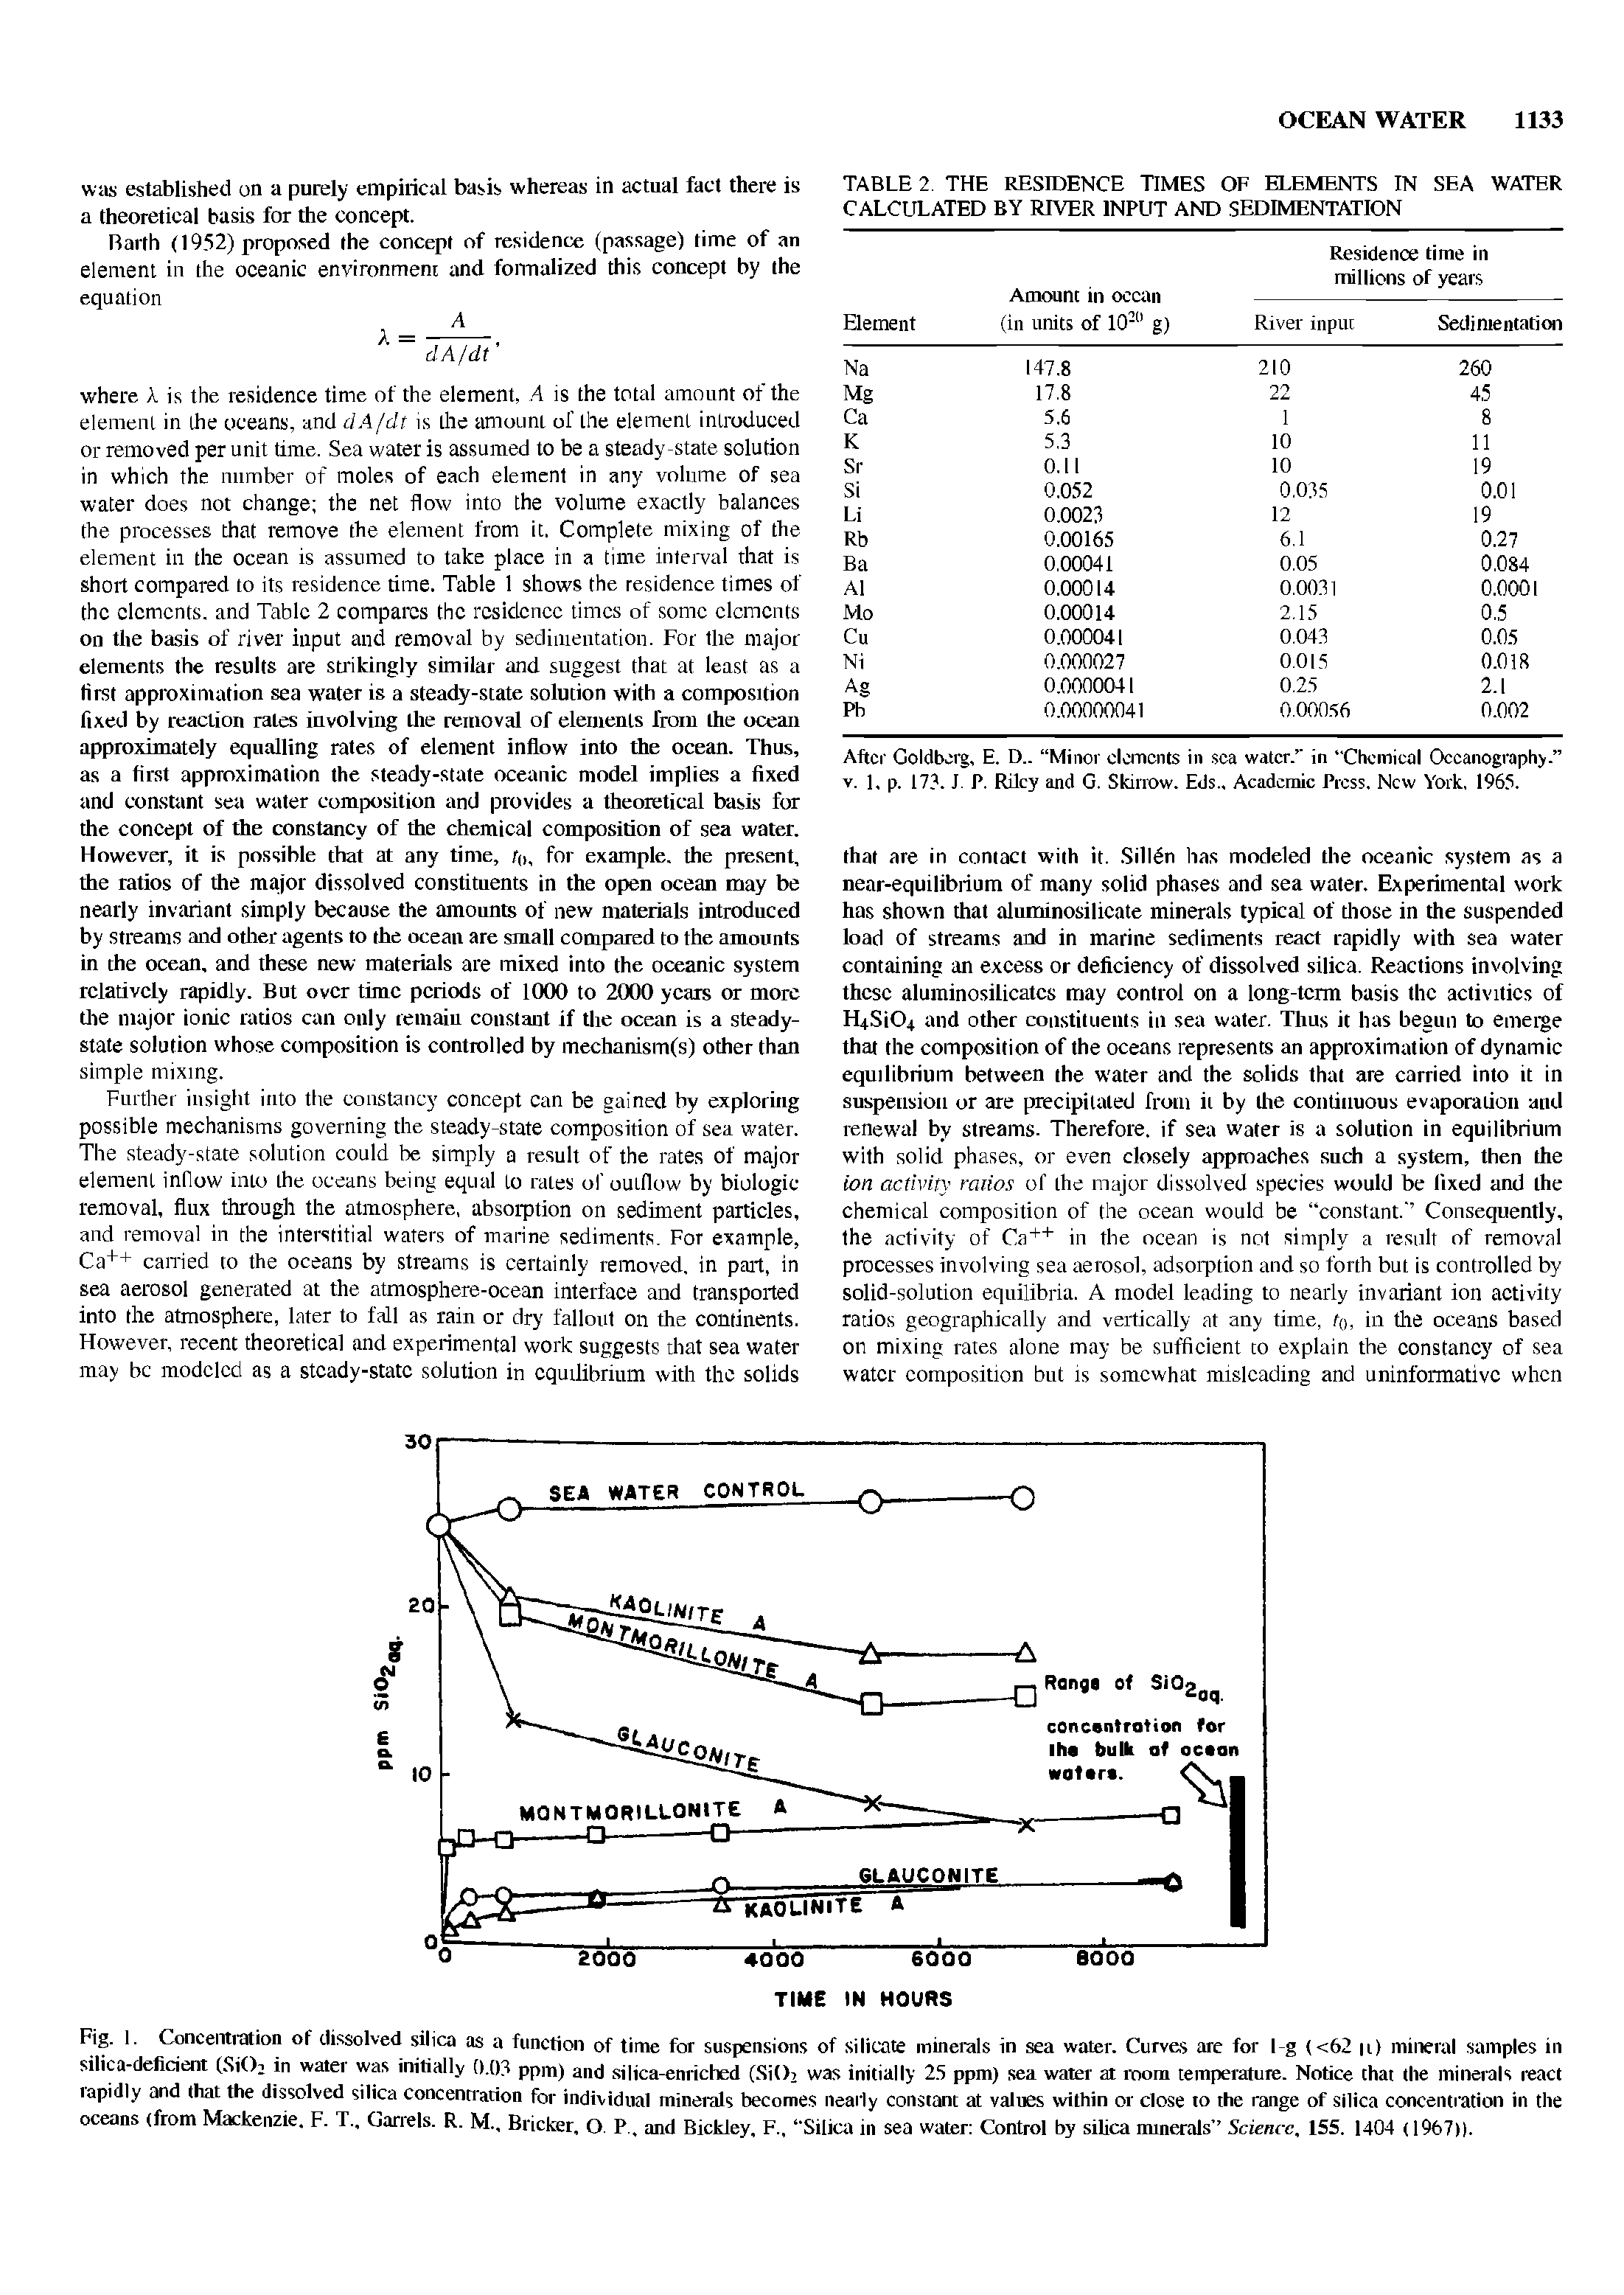 Fig. 1. Concentration of dissolved silica as a function of time for suspensions of silicate minerals in sea water. Curves are for I g (<62 u) mineral samples in silica-deficient (S1O2 in water was initially 0.03 ppm) and silica-enriched (Sit) was initially 25 ppm) sea water at room temperature. Notice that the minerals react rapidly and that the dissolved silica concentration for individual minerals becomes nearly constant at values within 01 close to the range of silica concentration in the oceans (from Mackenzie. F. T., Cartels. R. M., Bricker, O P, and Bickley, F., Silica in sea water Control by silica minerals Science, 155. 1404 (1967)).